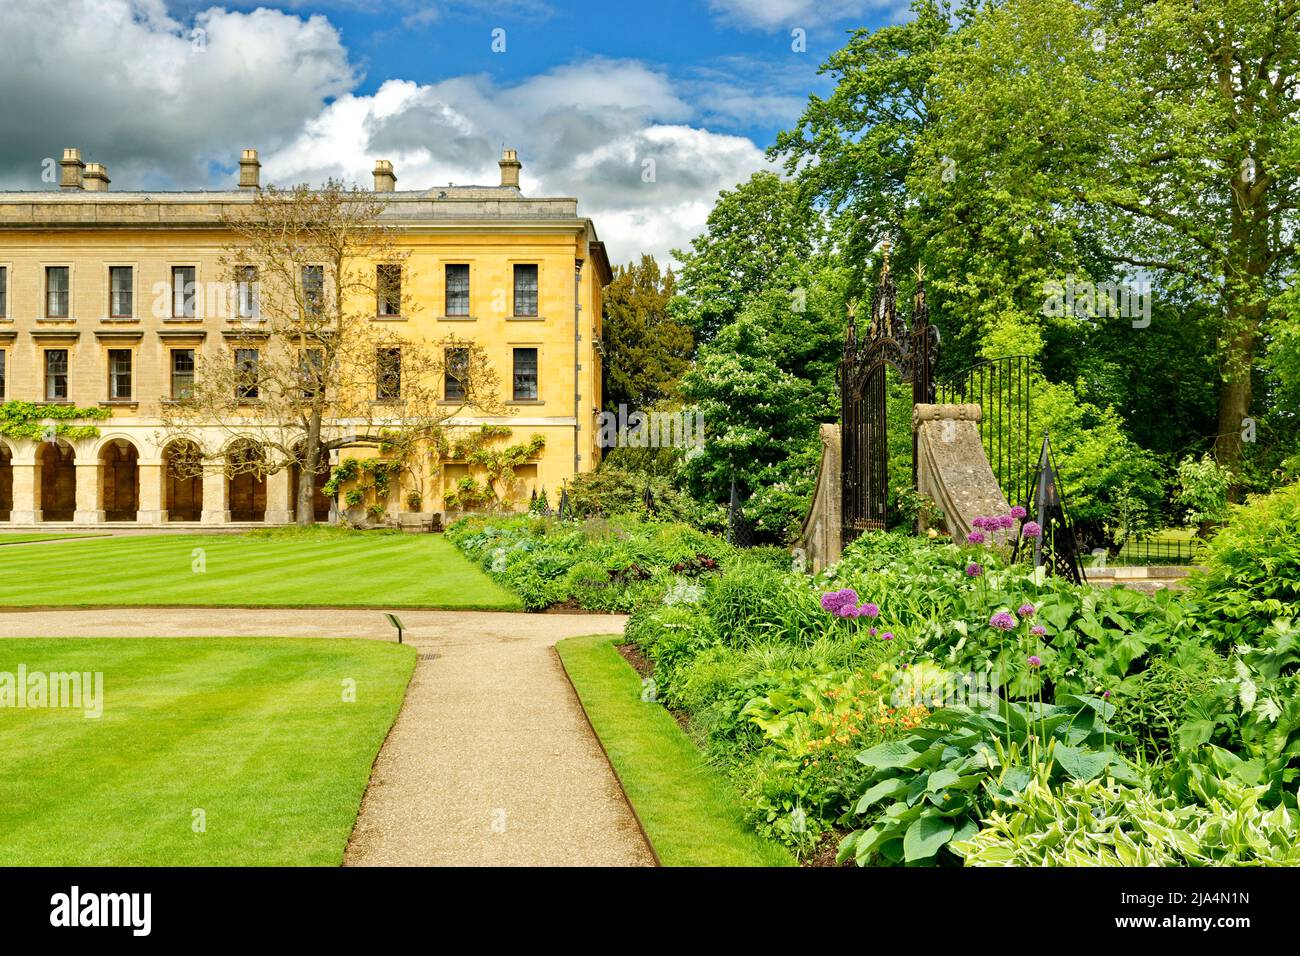 OXFORD CITY ENGLAND MAGDALEN COLLEGE THE NEW BUILDING EMPRESS TREE  FLOWER BEDS AND LAWNS IN SPRING Stock Photo